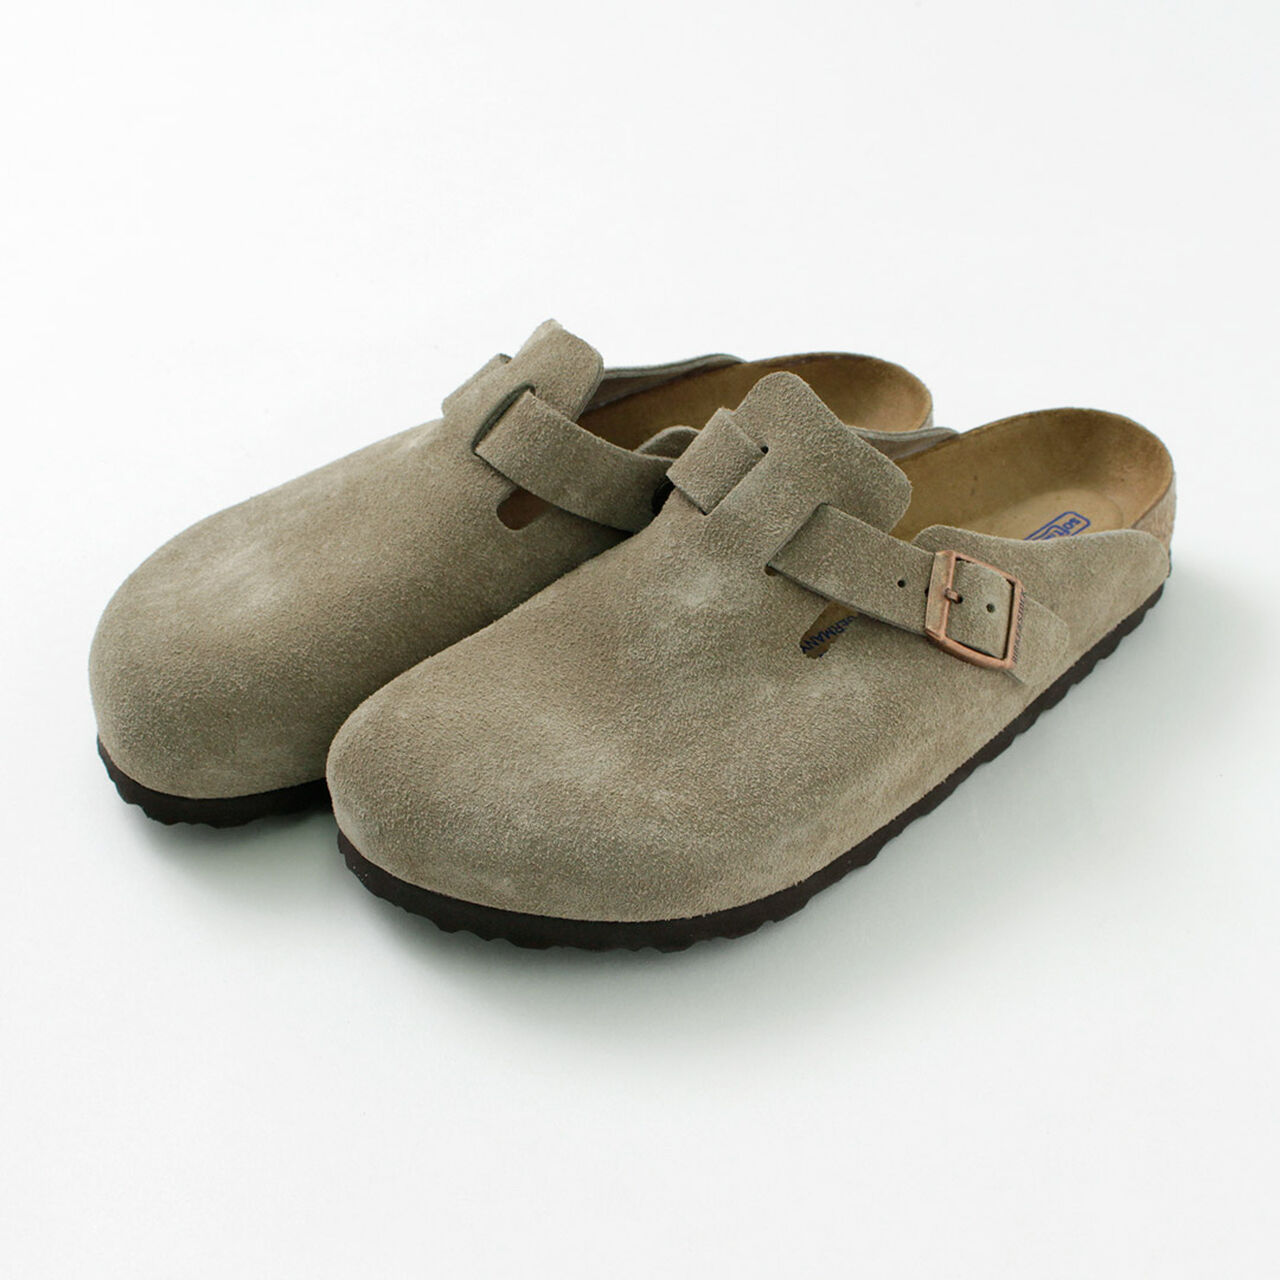 Boston SFB Clog sandals,Taupe, large image number 0